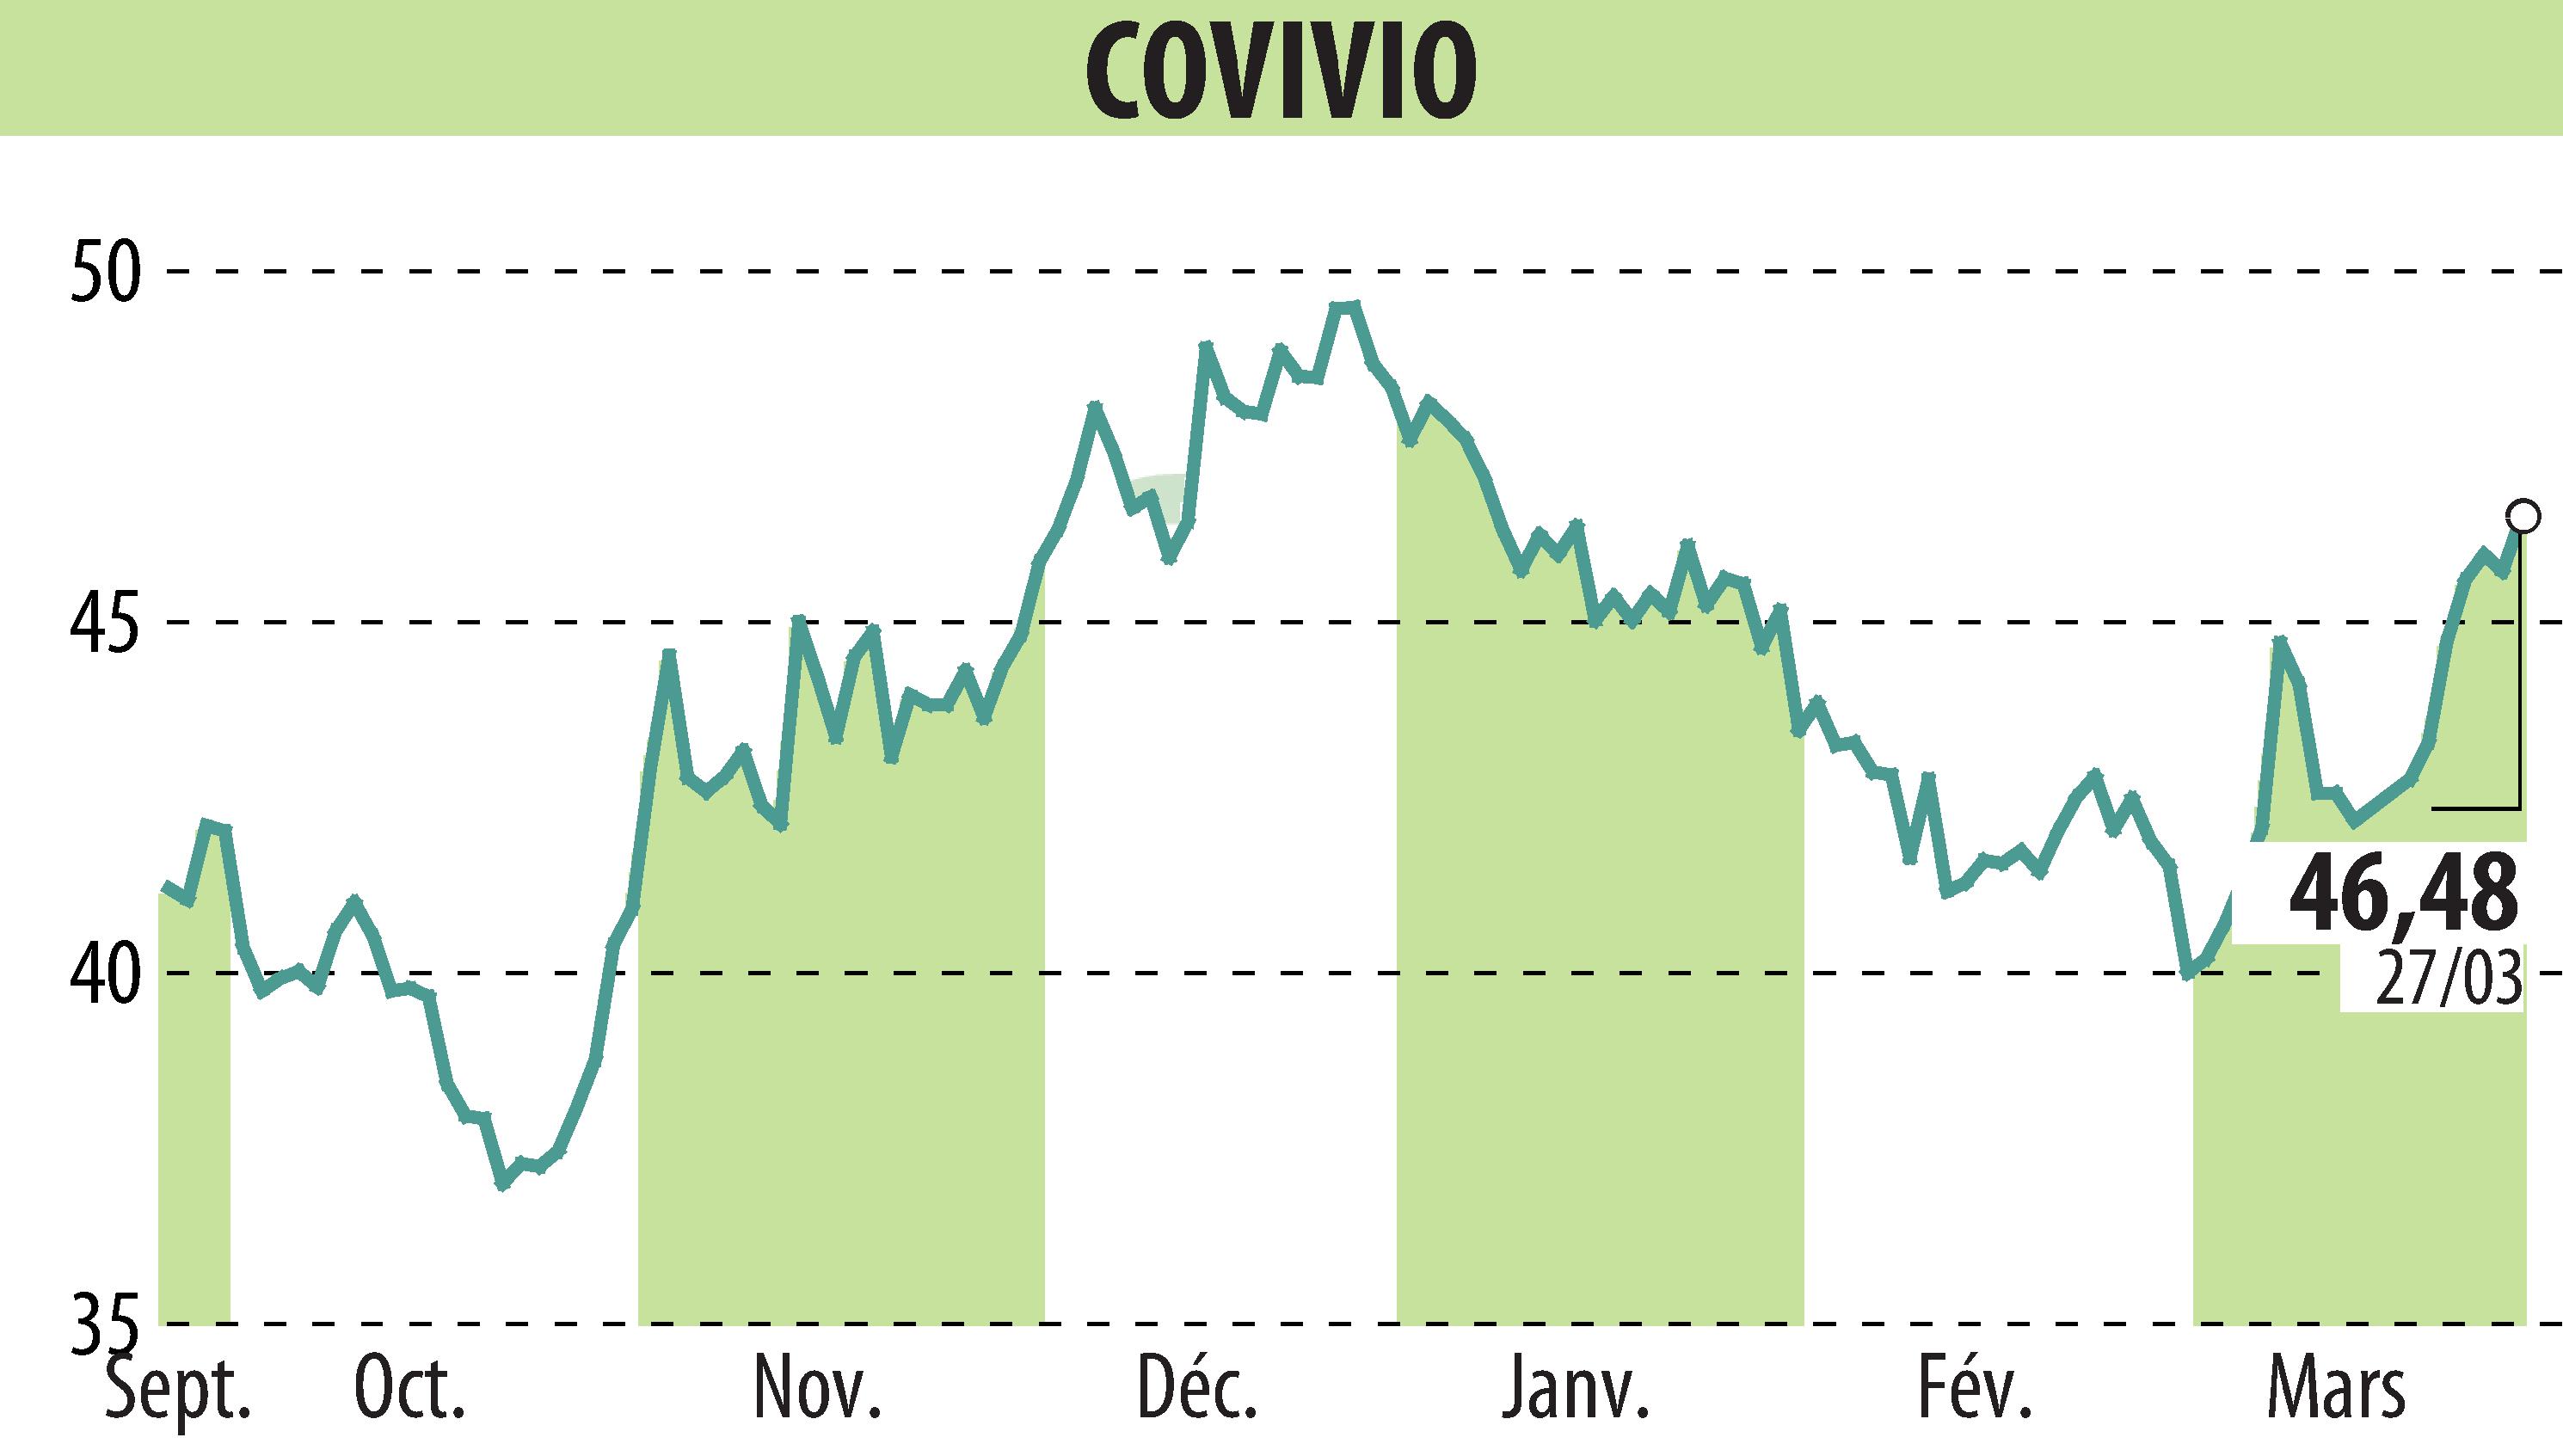 Stock price chart of COVIVIO (EPA:COV) showing fluctuations.